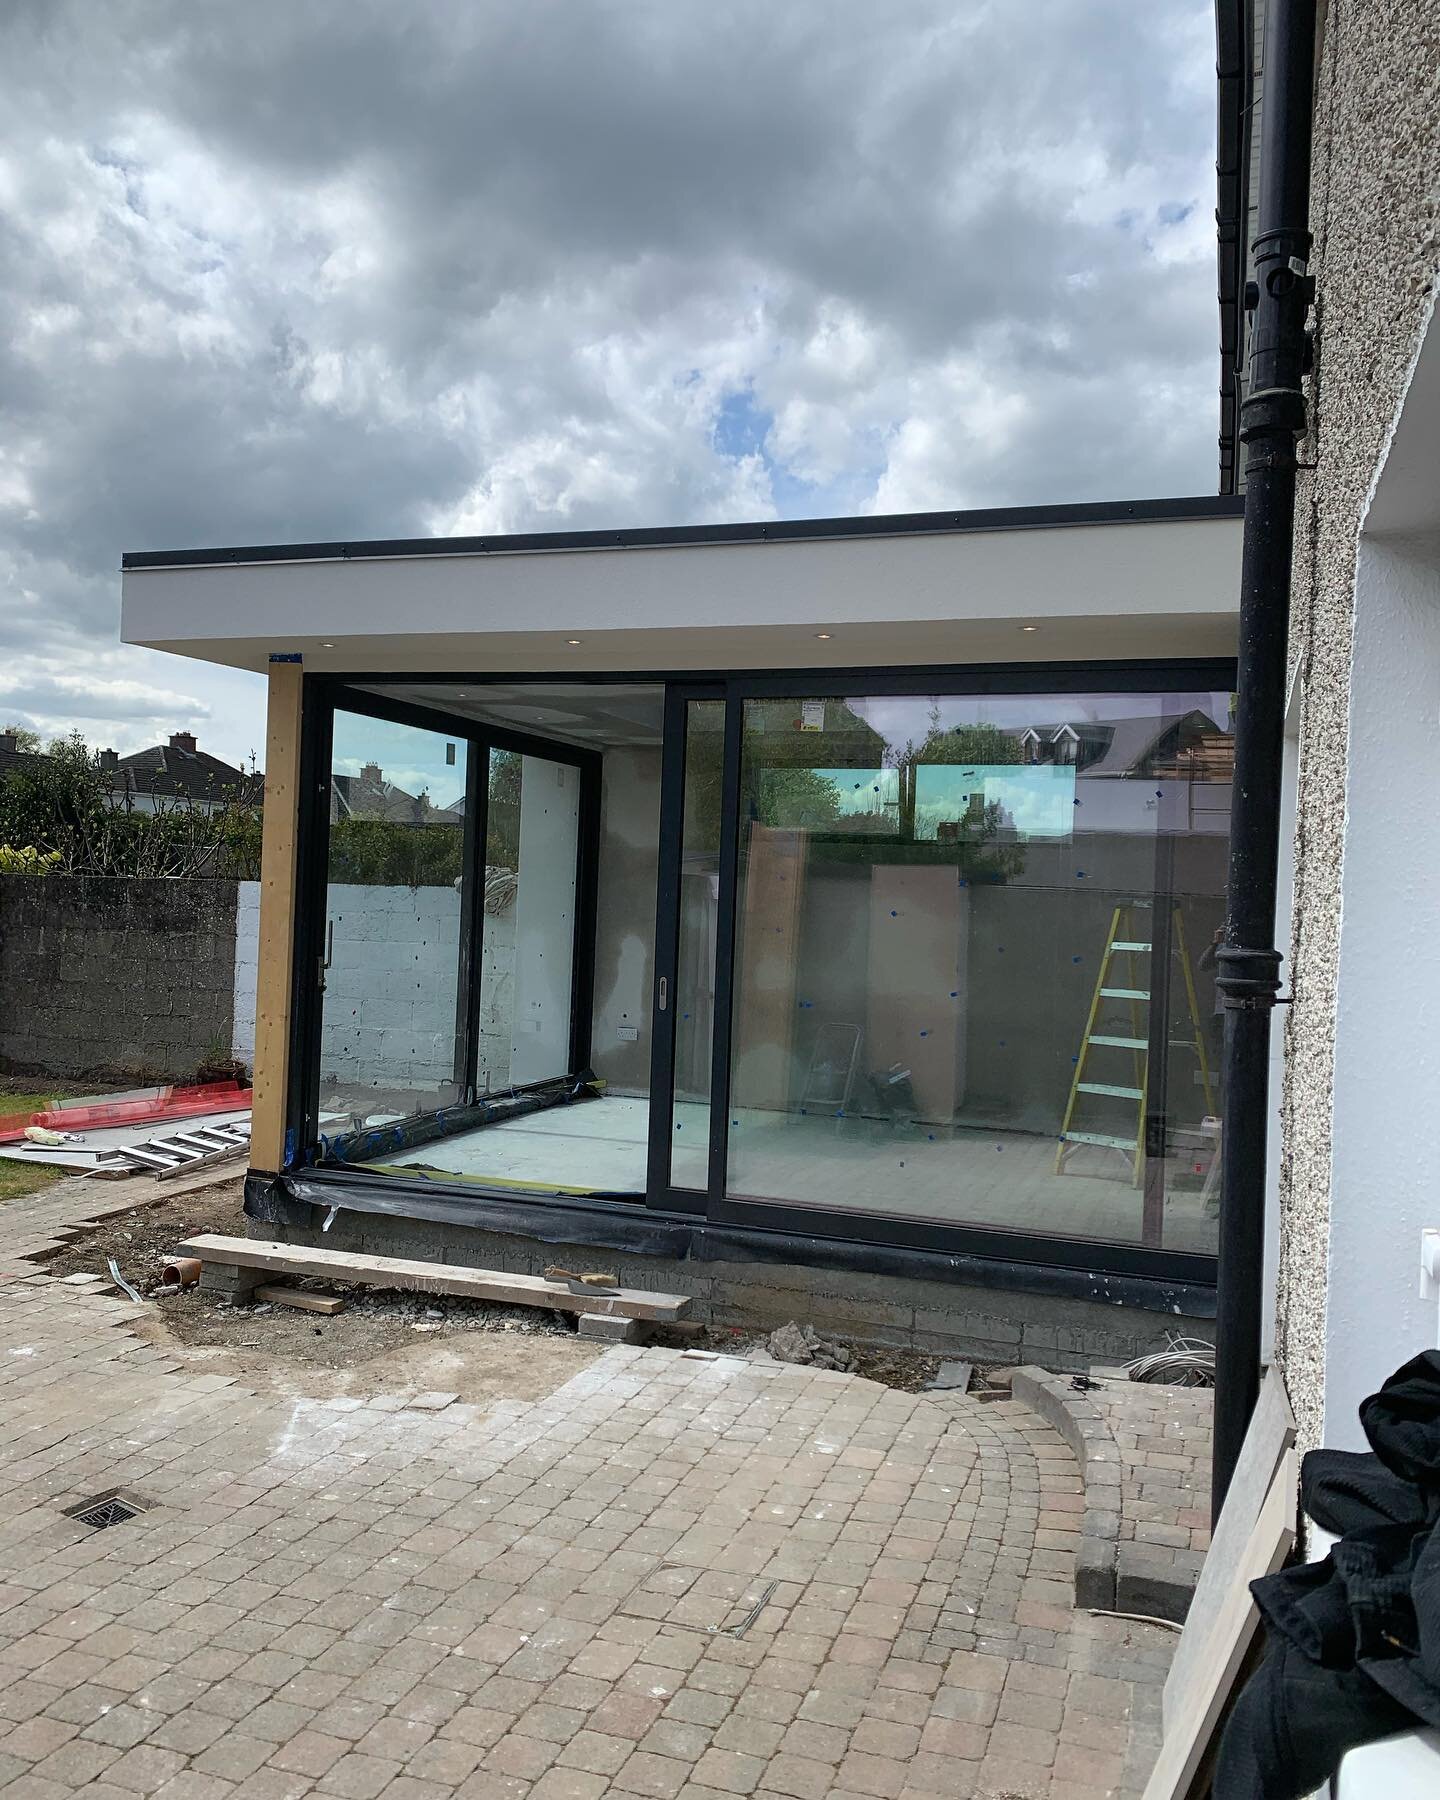 Progression pictures on our Castleknock project. 

Windows and sliding doors installed.
Acrylic render finished to high standard. 
Two metre skylight light in place and paralon covered flat roof complete.
🏠👌

#slidingdoors#acrylicrender#flatroof#sk